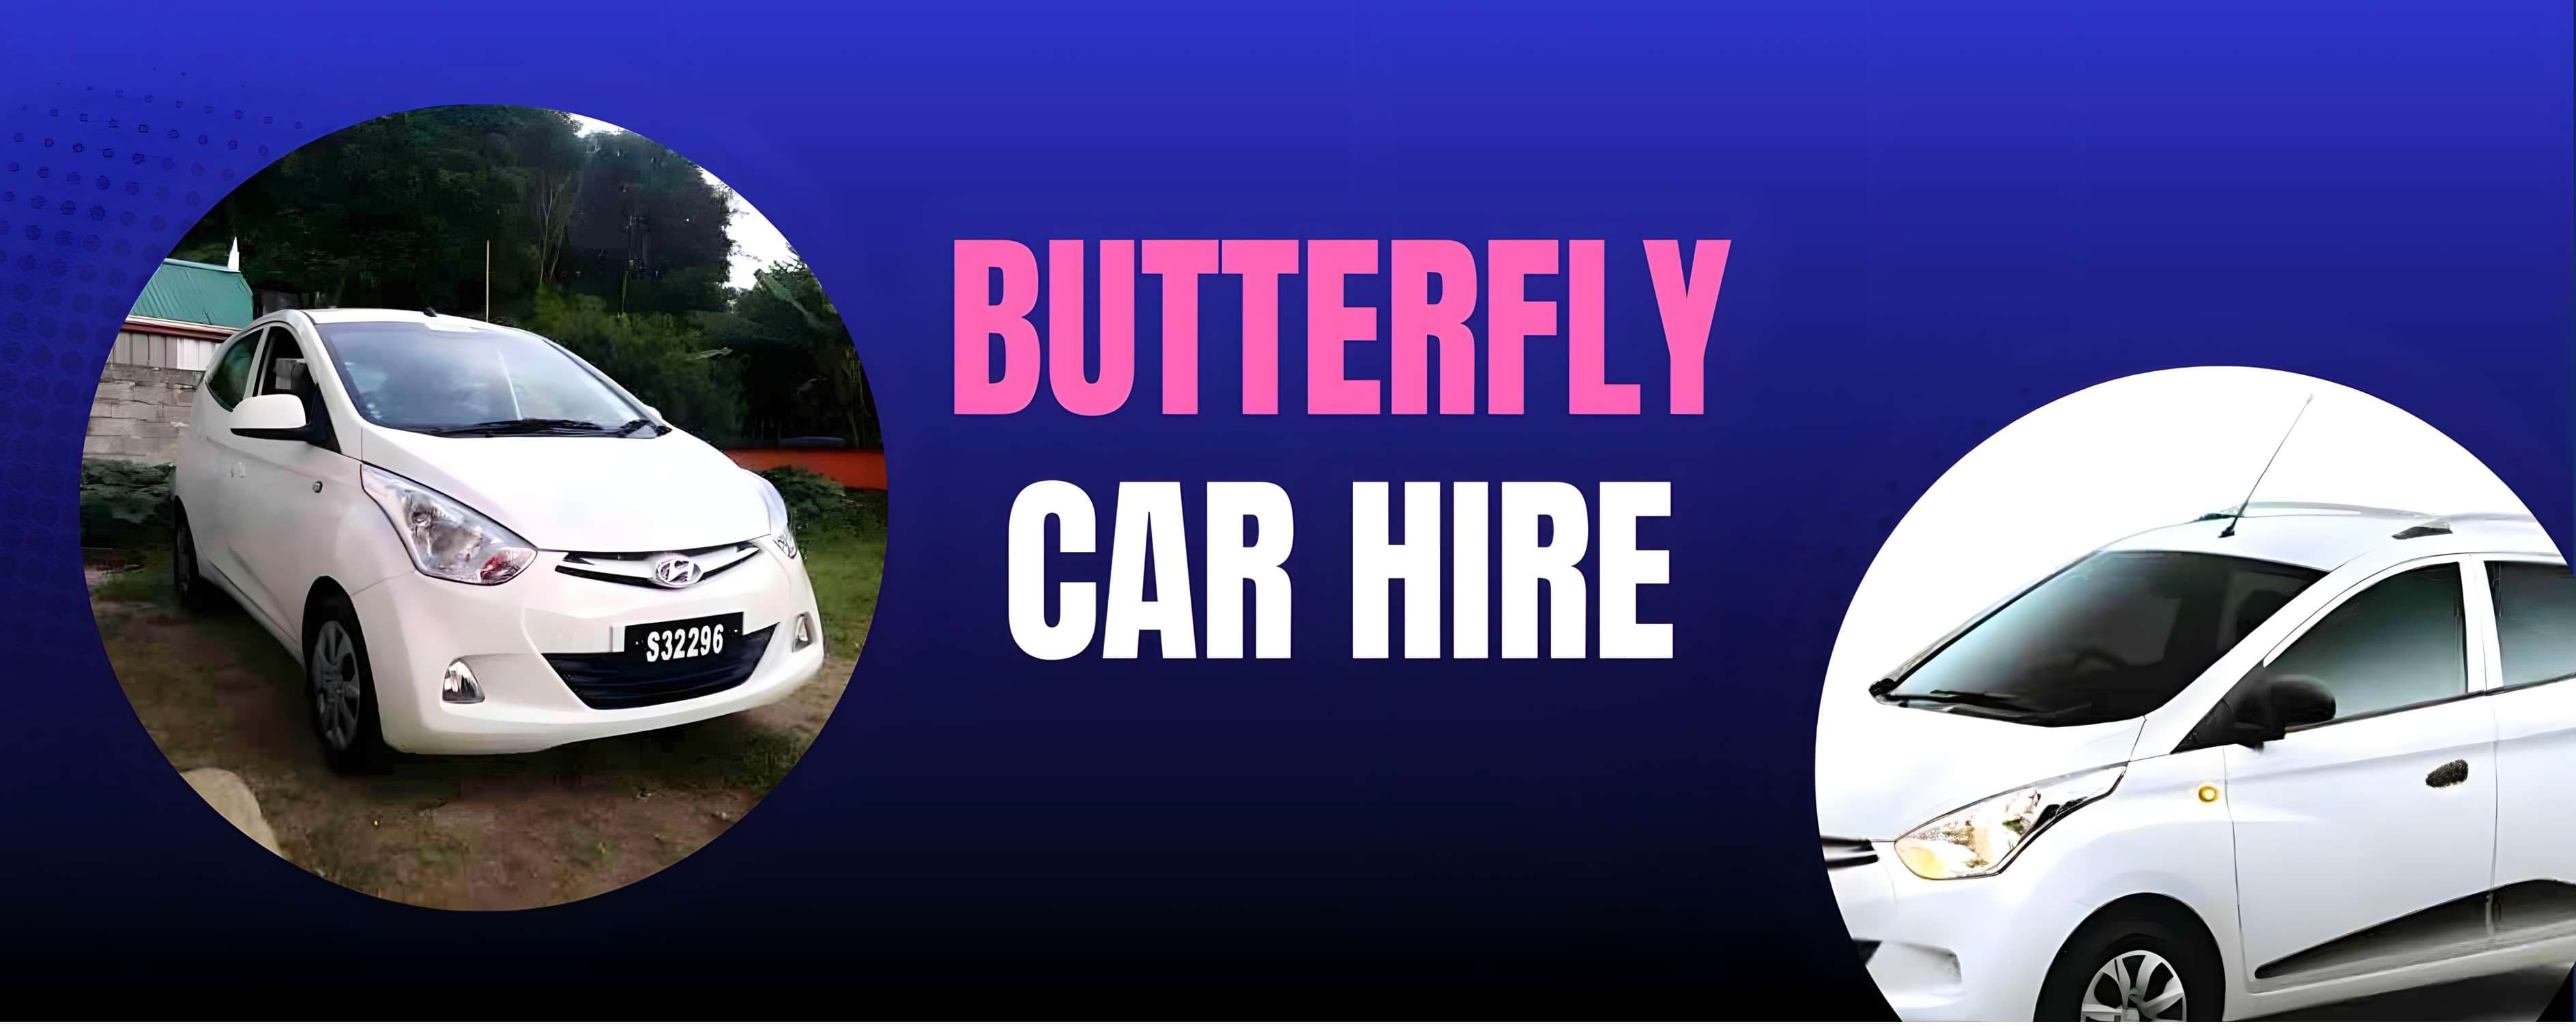 Butterfly Car Hire